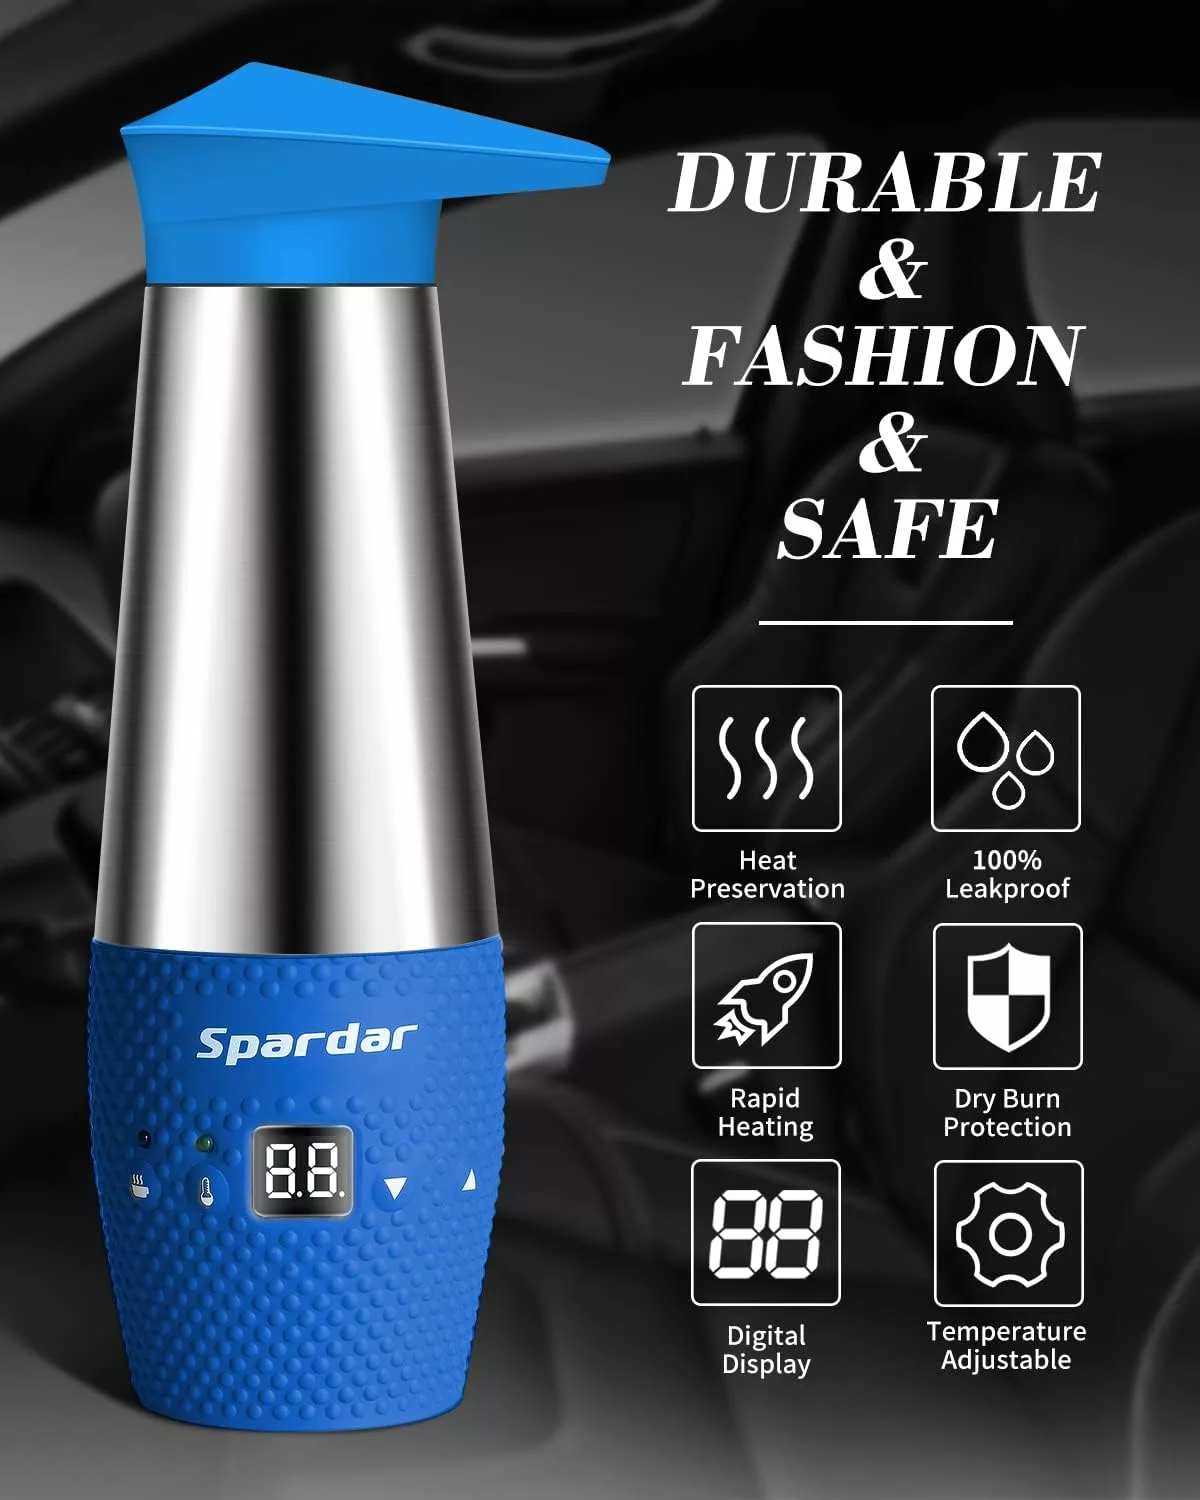 Spardar 12v Kettle, Travel Kettles Electric Small, Car Kettle, Portable Kettle, 348ml Travel Electric Kettle for Car Truck, Temperature Control Kettle, Double Insulation Anti-Scalding Design (Blue)